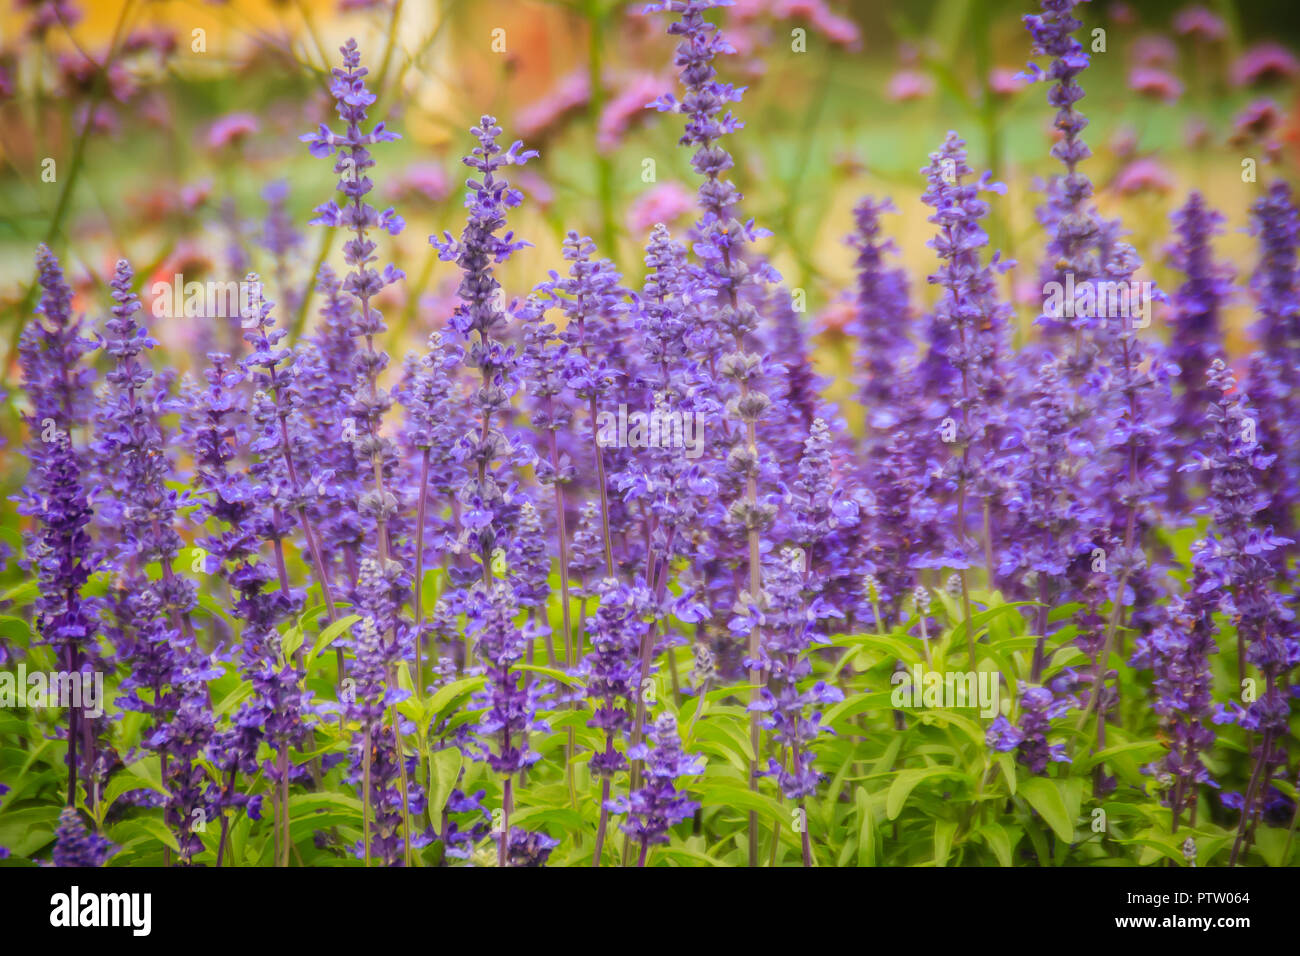 Mealycup sage (Salvia farinacea) purple flower background. Salvia farinacea, also known as mealycup sage, or mealy sage, is a herbaceous perennial nat Stock Photo